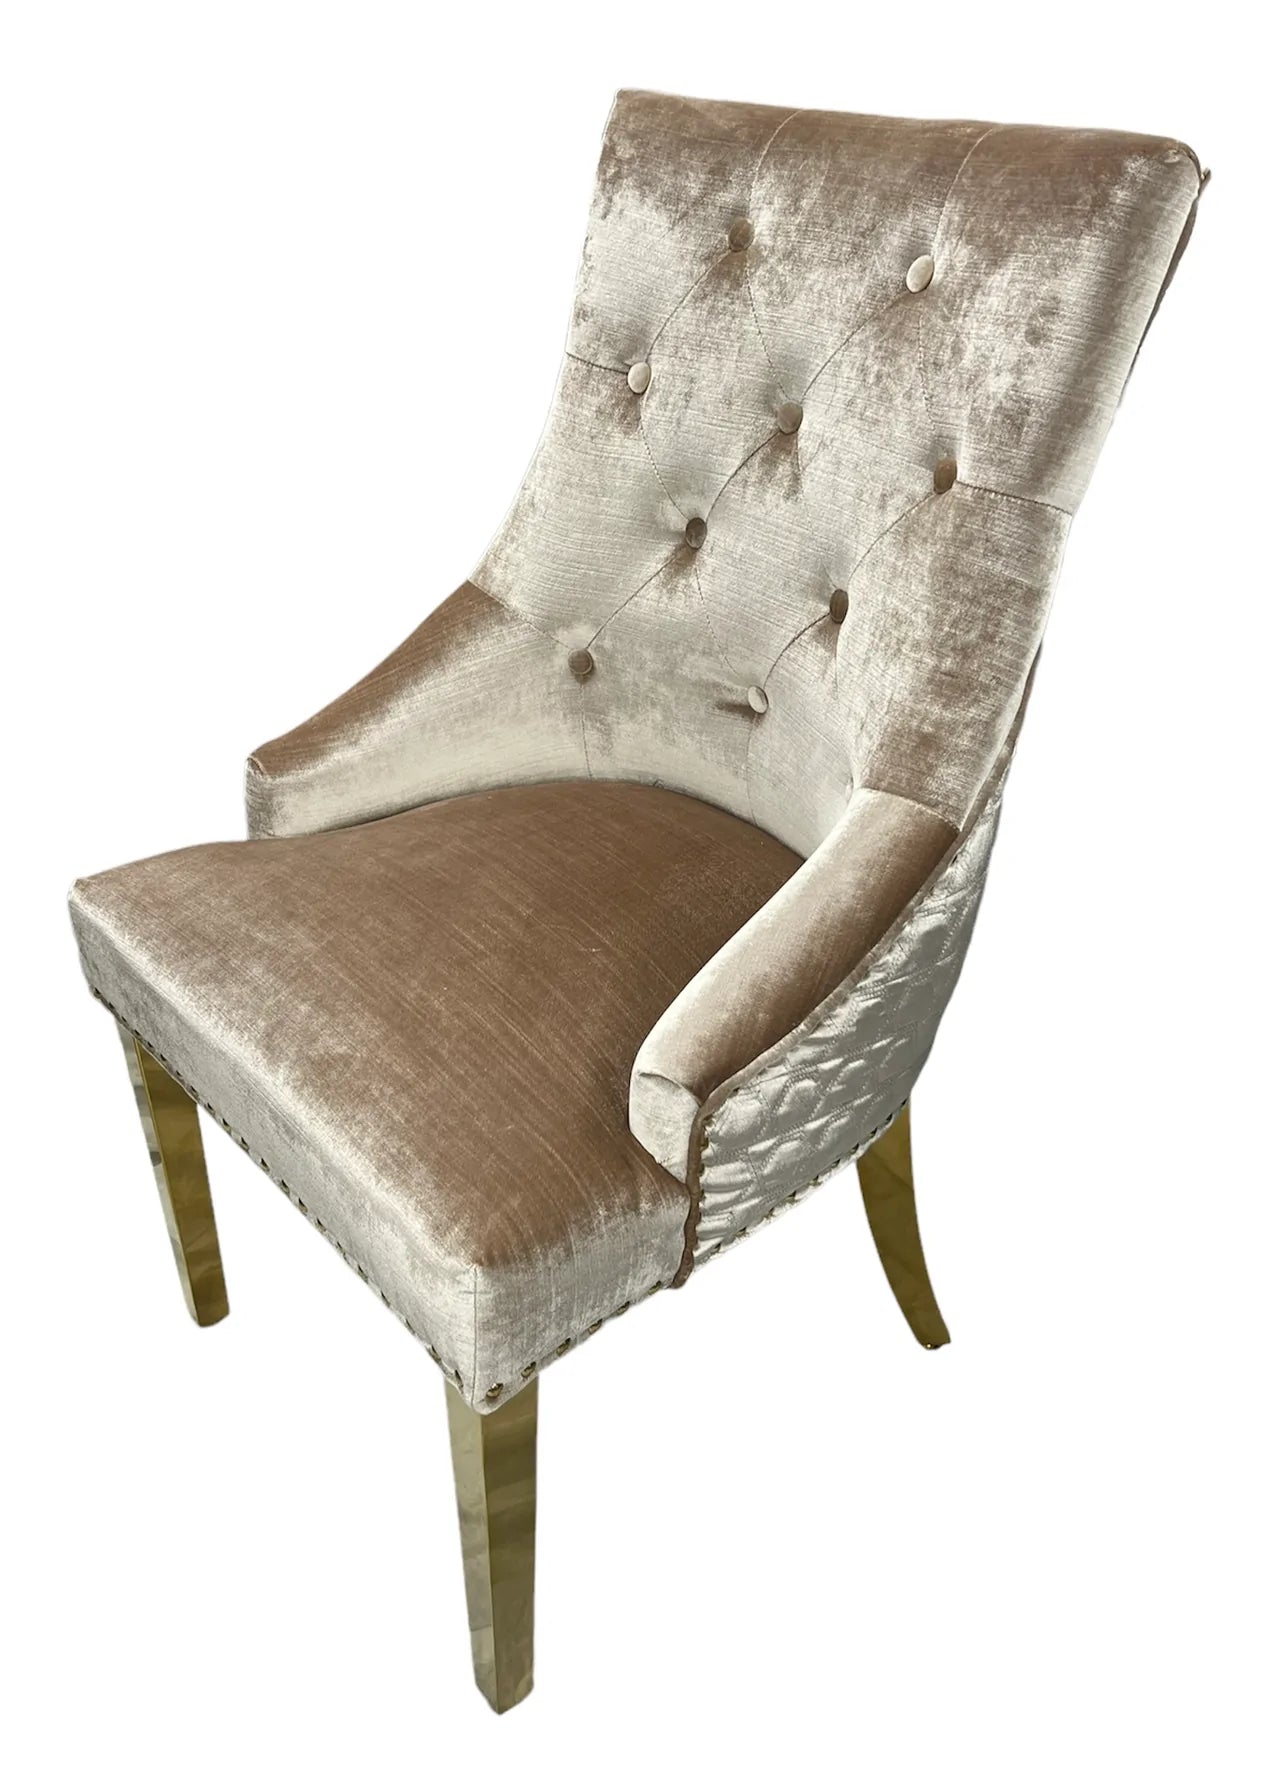 Gold Louis Table with 4 chairs available in black, grey and mink (add in notes colour of chair) - Mirror4you